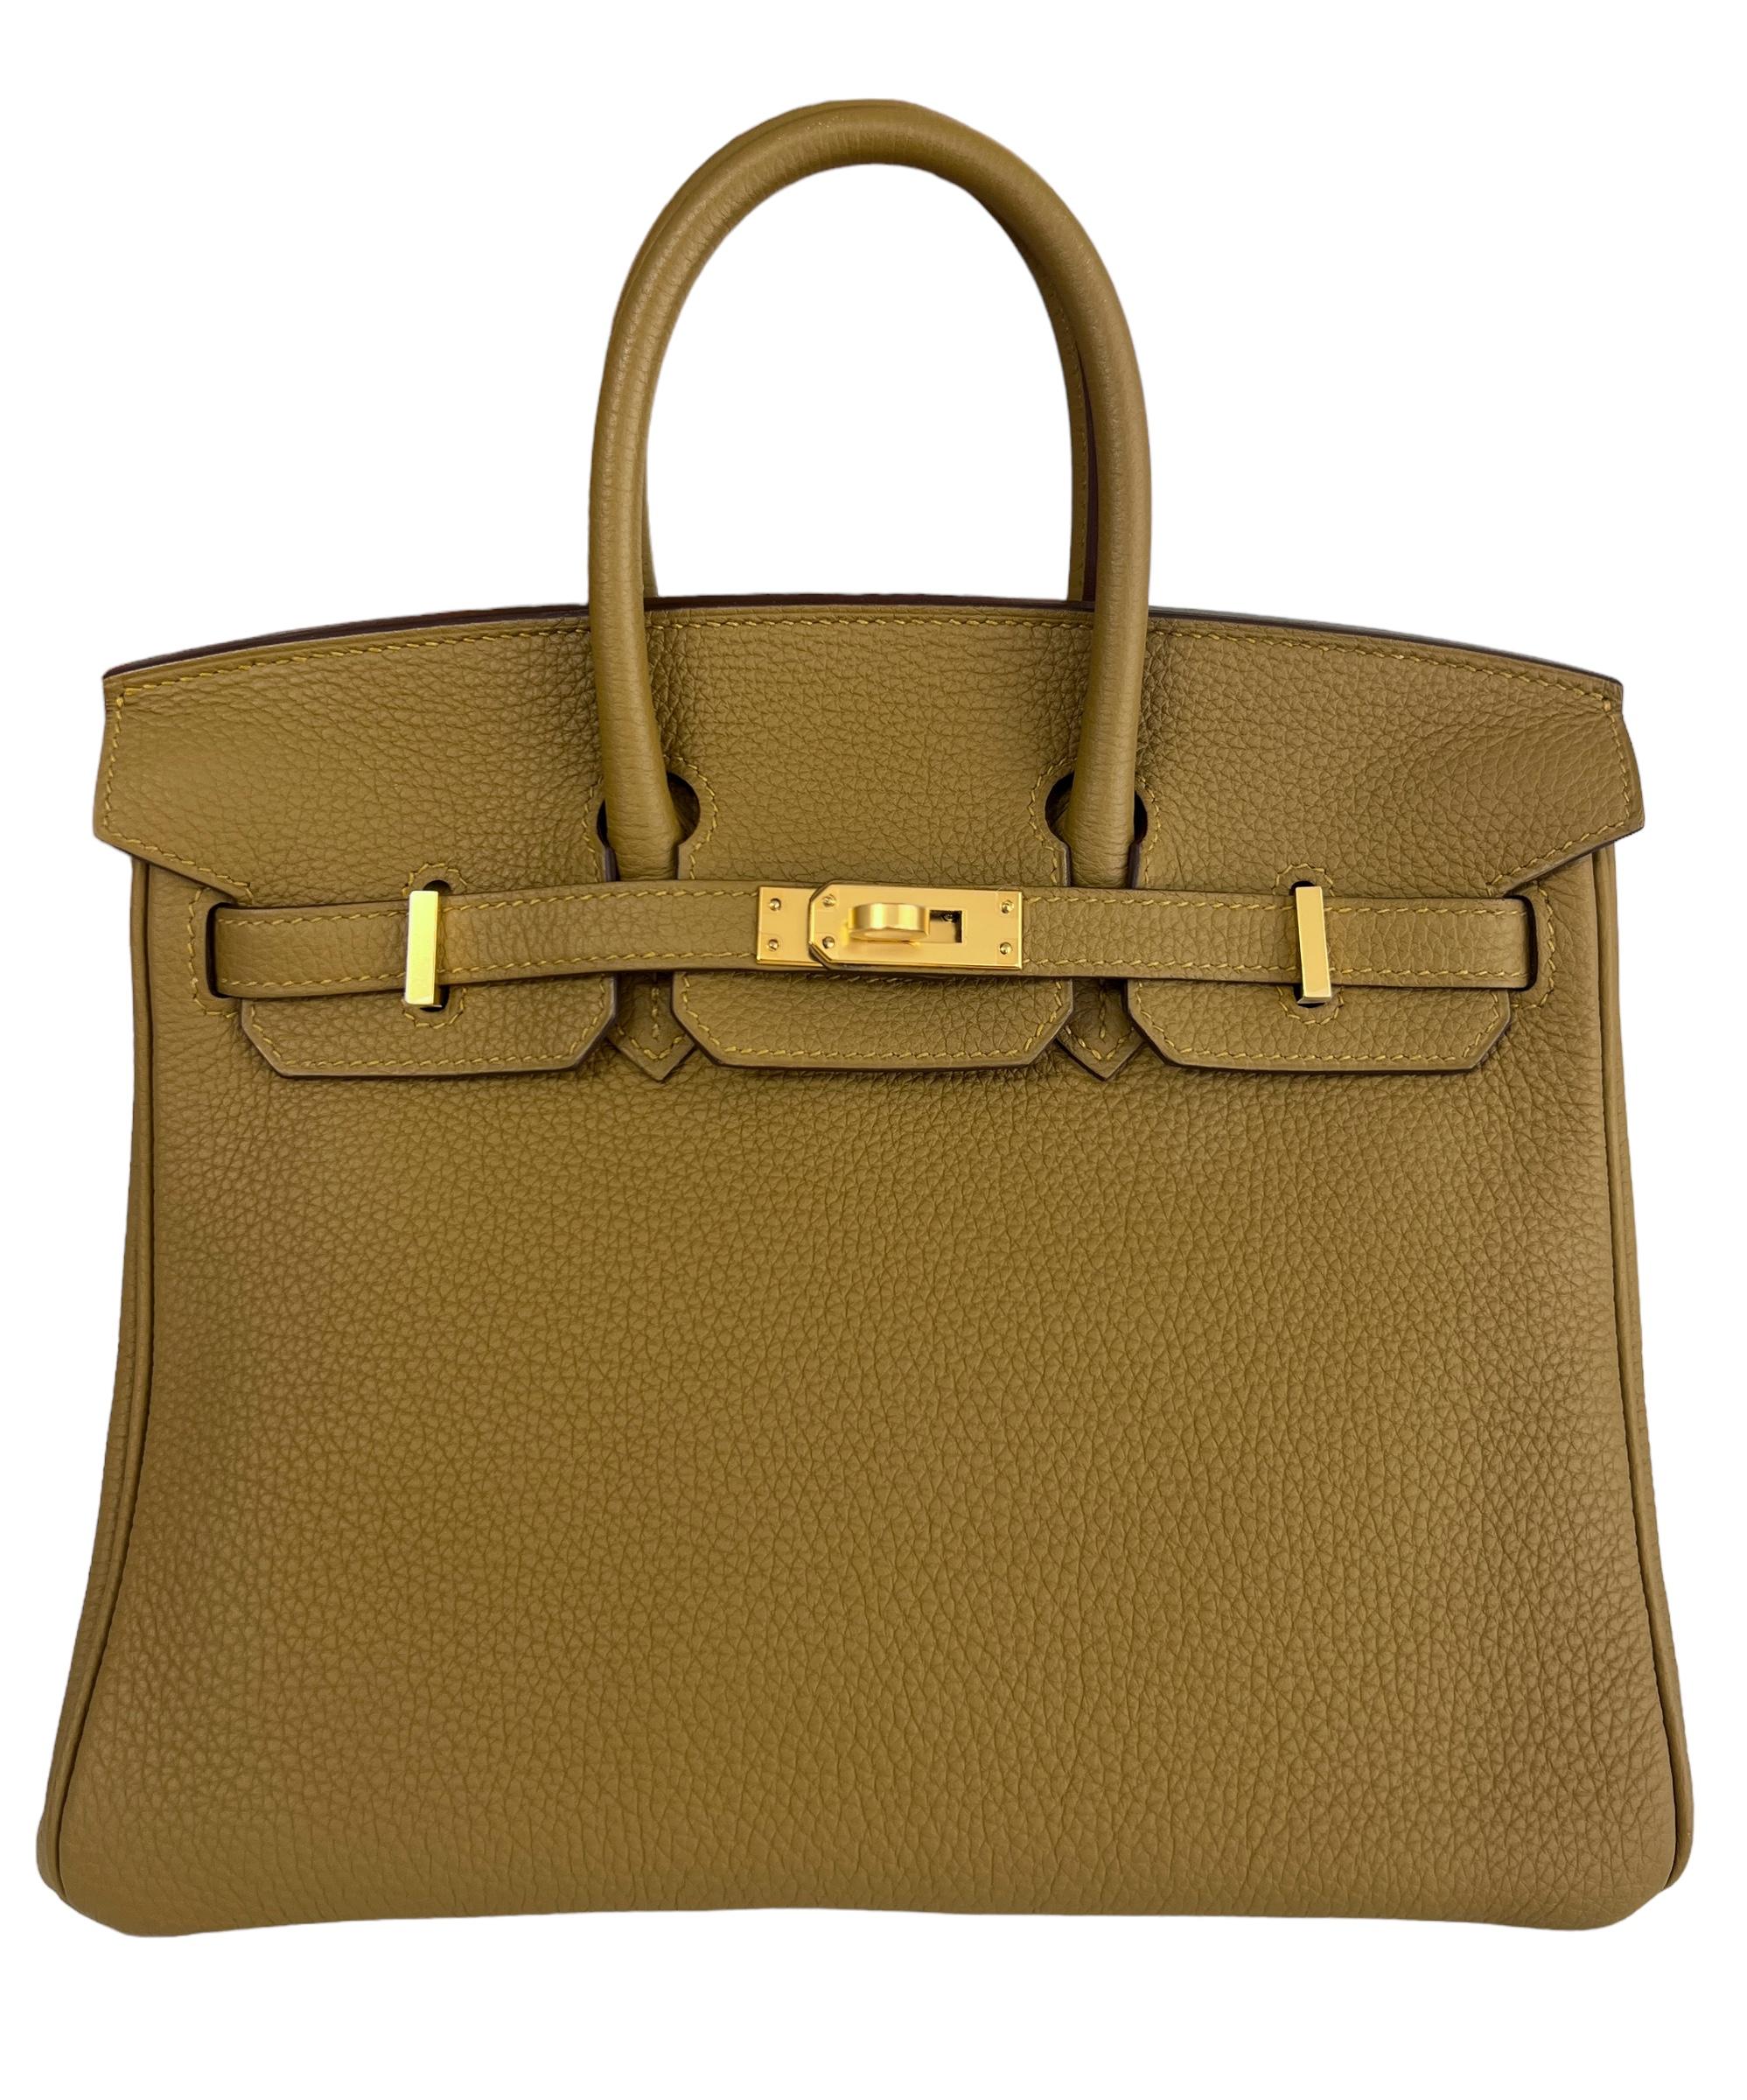 Absolutely Stunning and One The Most Coveted and Difficult to get Hermes Combos! As New Hermes Birkin 25 Bronze Dore Togo Leather complimented by Gold Hardware. As New Plastic on all Hardware and Feet. Y Stamp 2020. 

Please Note, the bag has minor